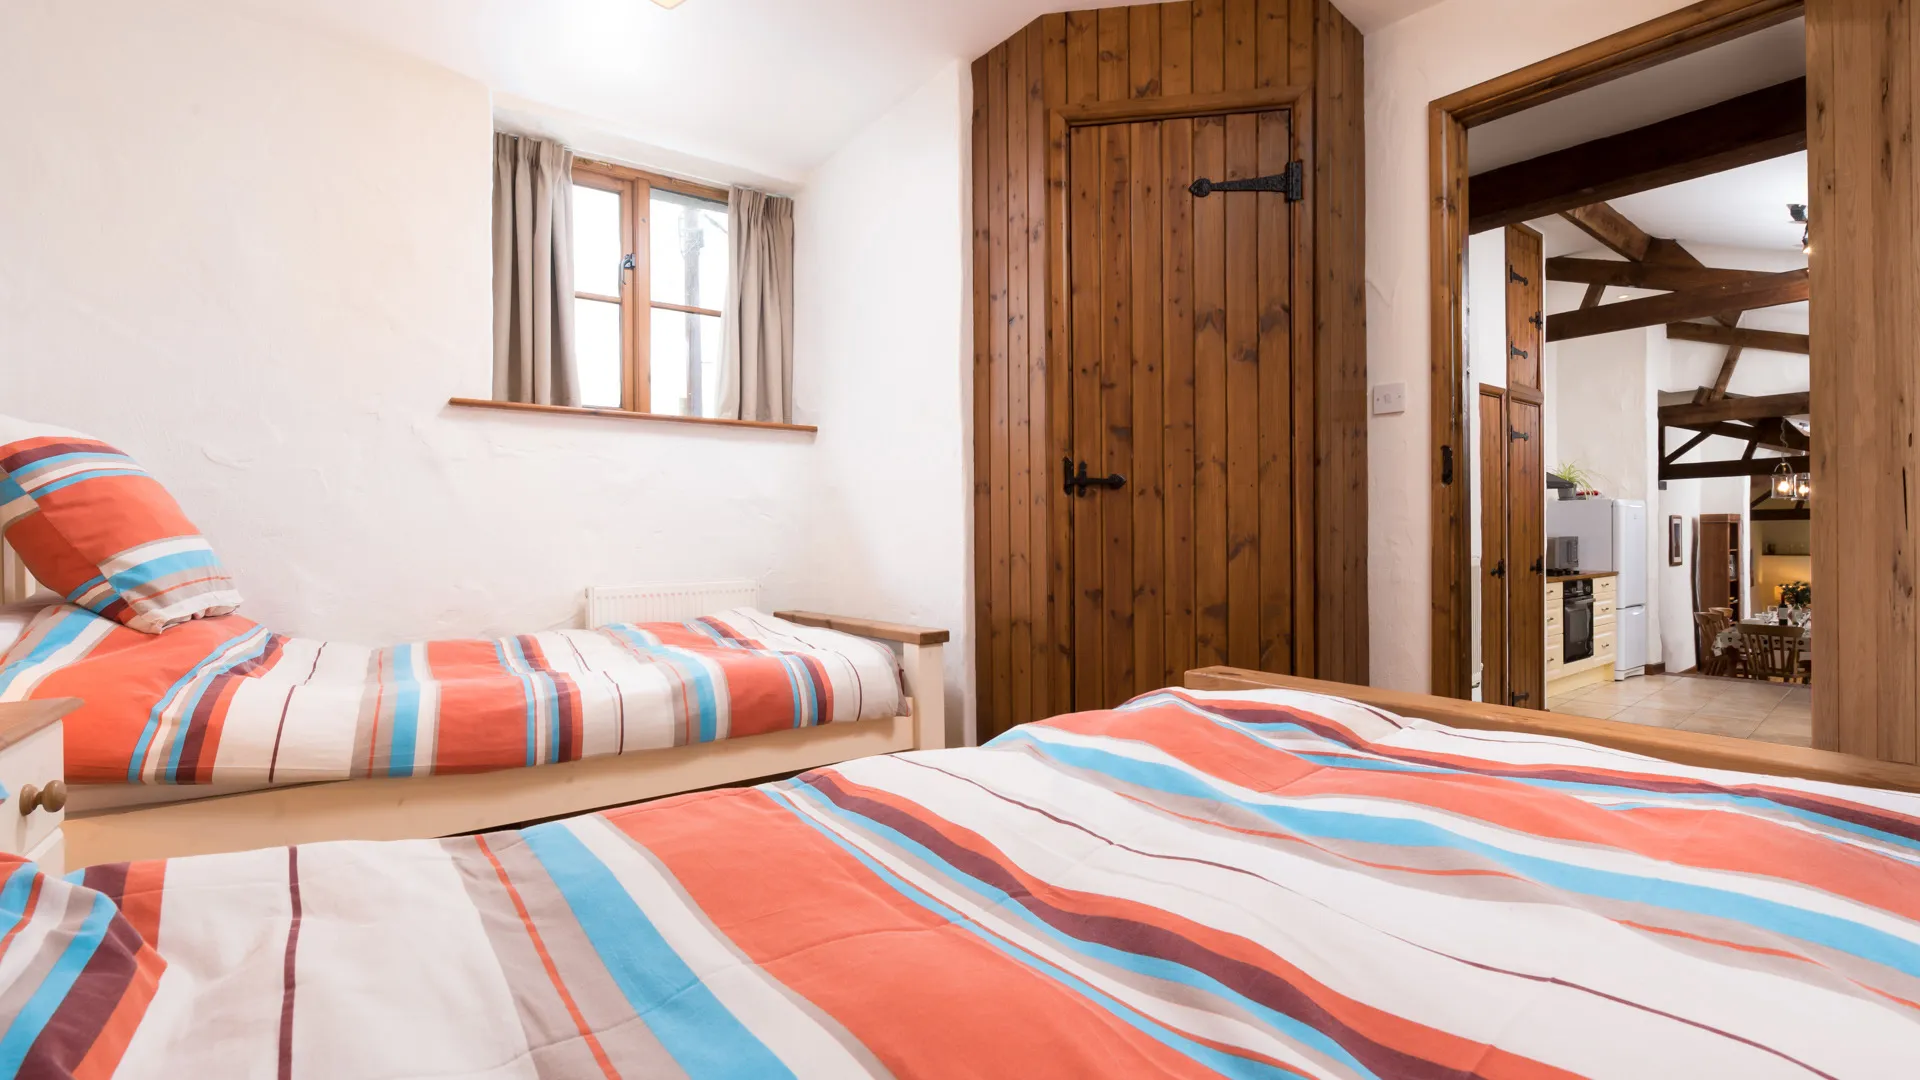 The Byre twin bedroom